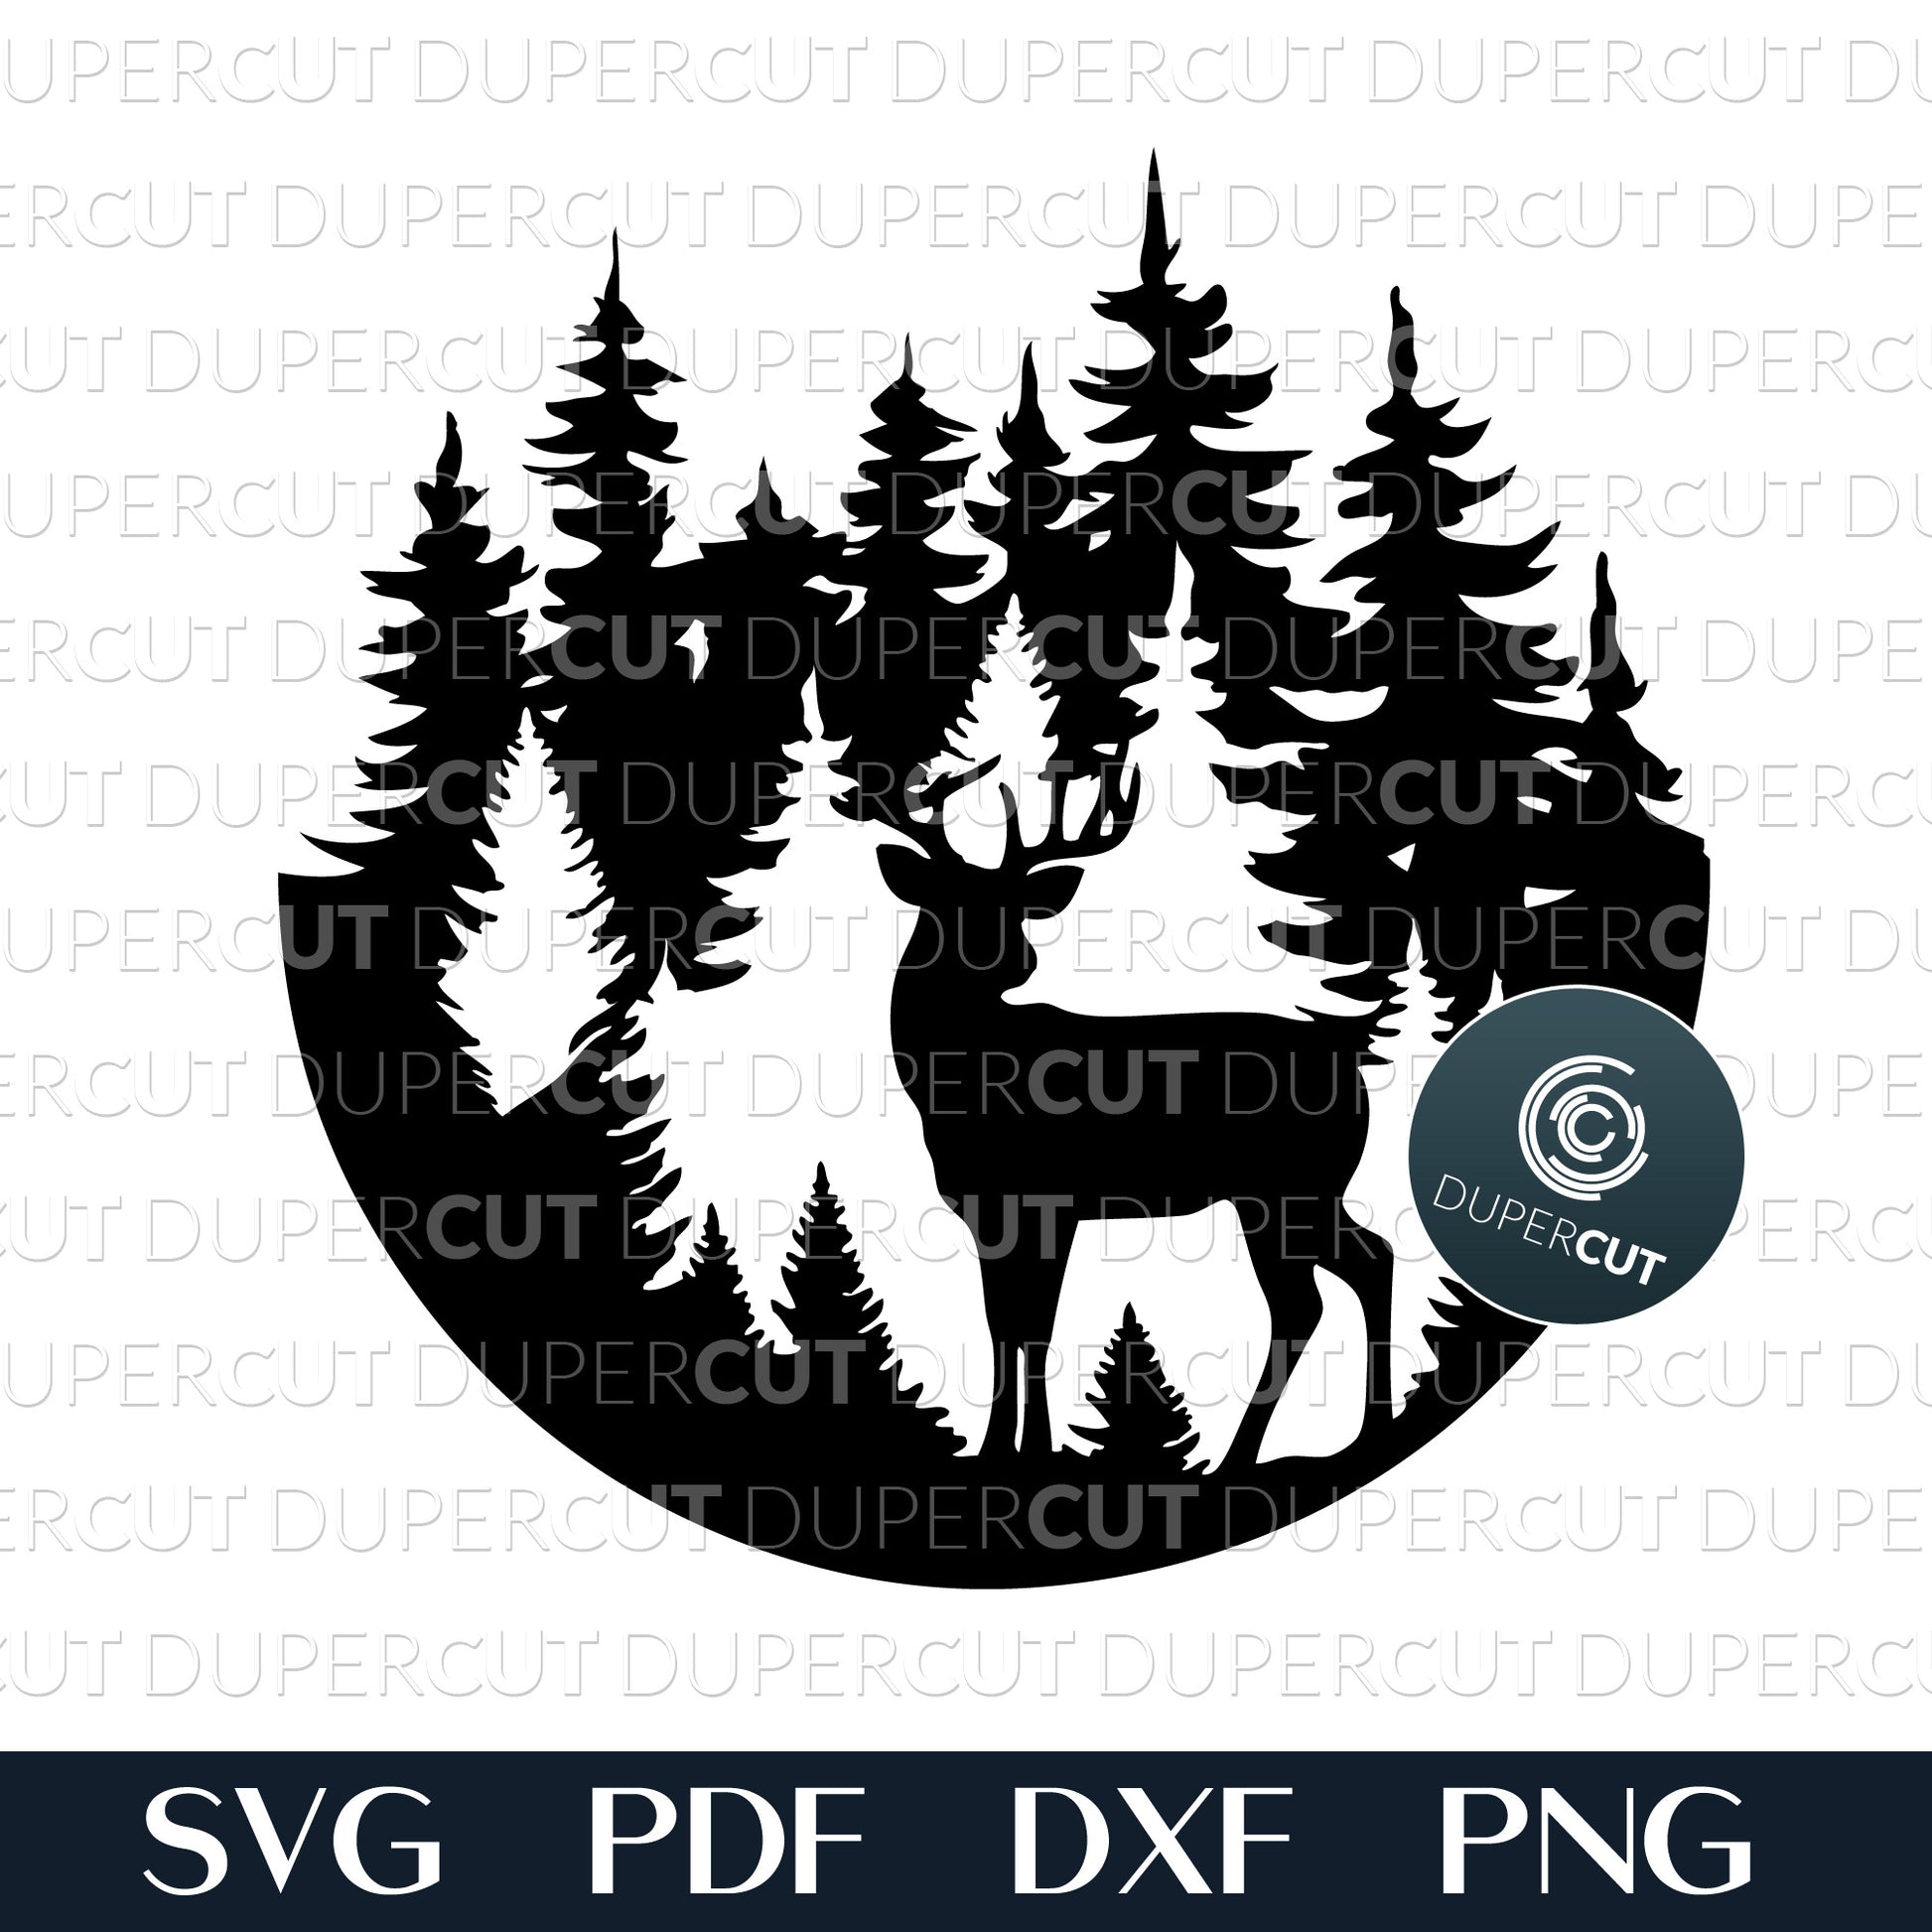 Deer woods scene welcome sign layered files. SVG PDF DXF cutting template for laser cutting, engraving, Glowforge, Cricut, Silhouette, CNC plasma